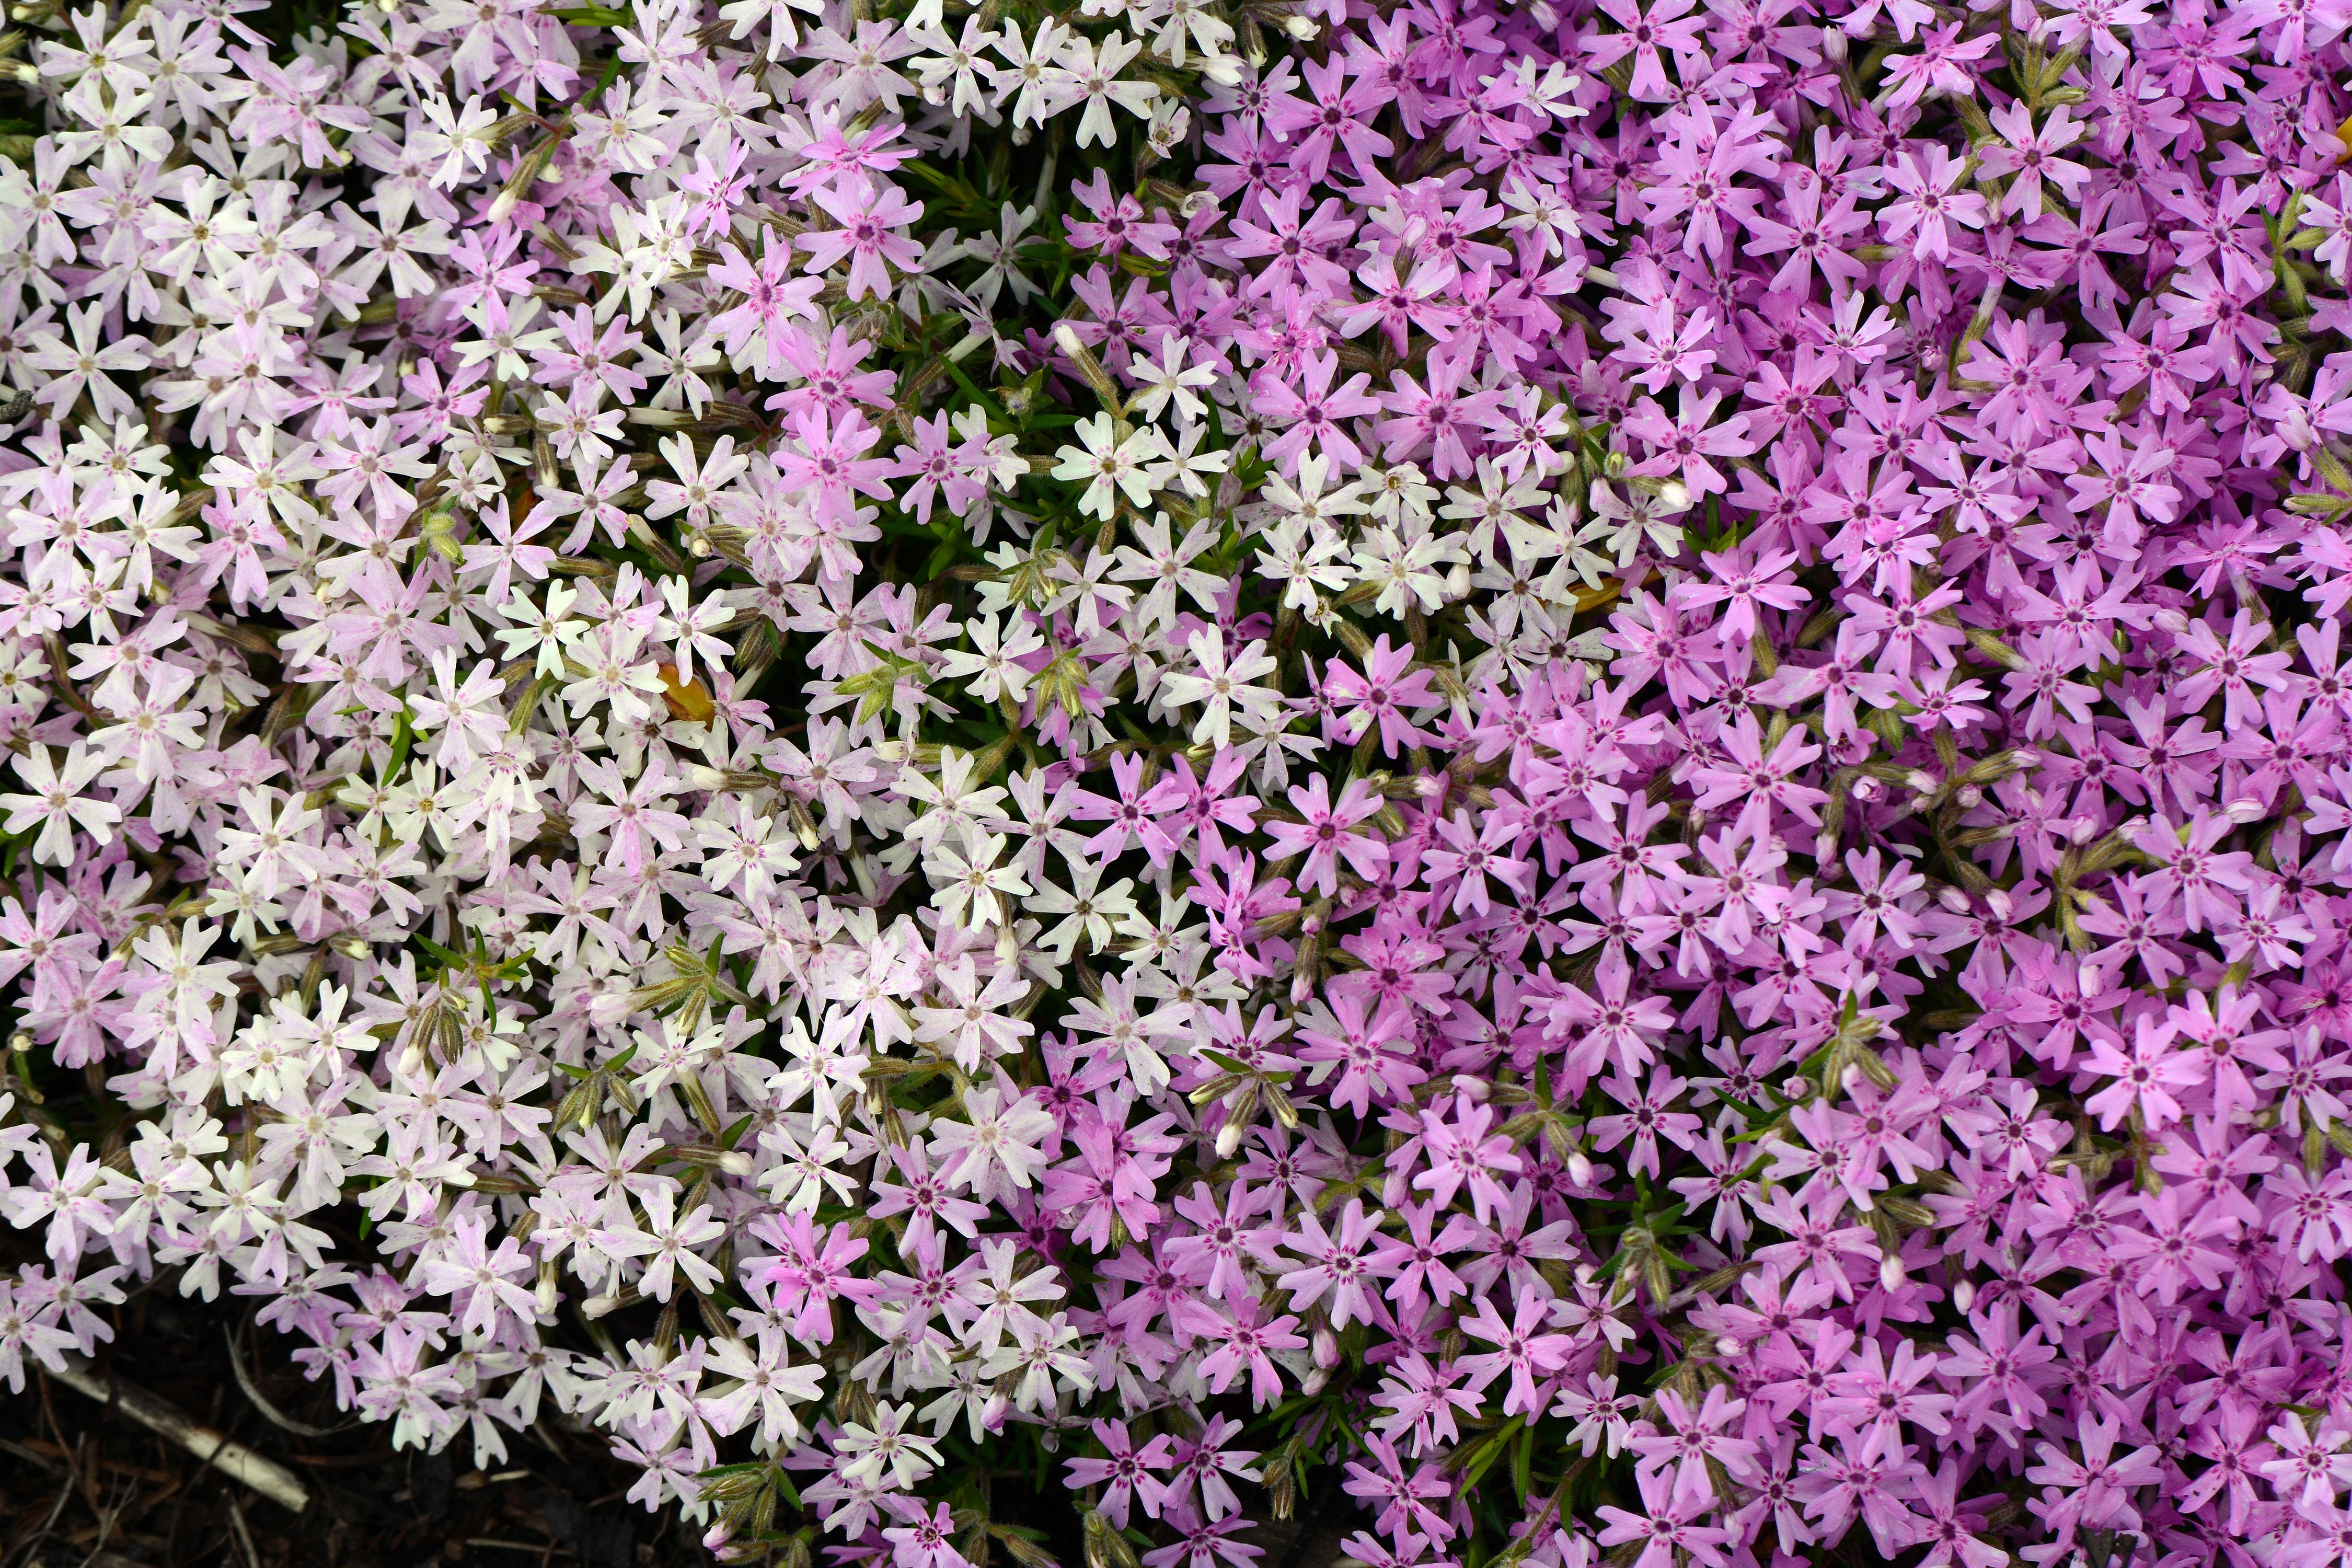 images/plants/phlox/phl-perfectly-puzzling/phl-perfectly-puzzling-0001.jpg